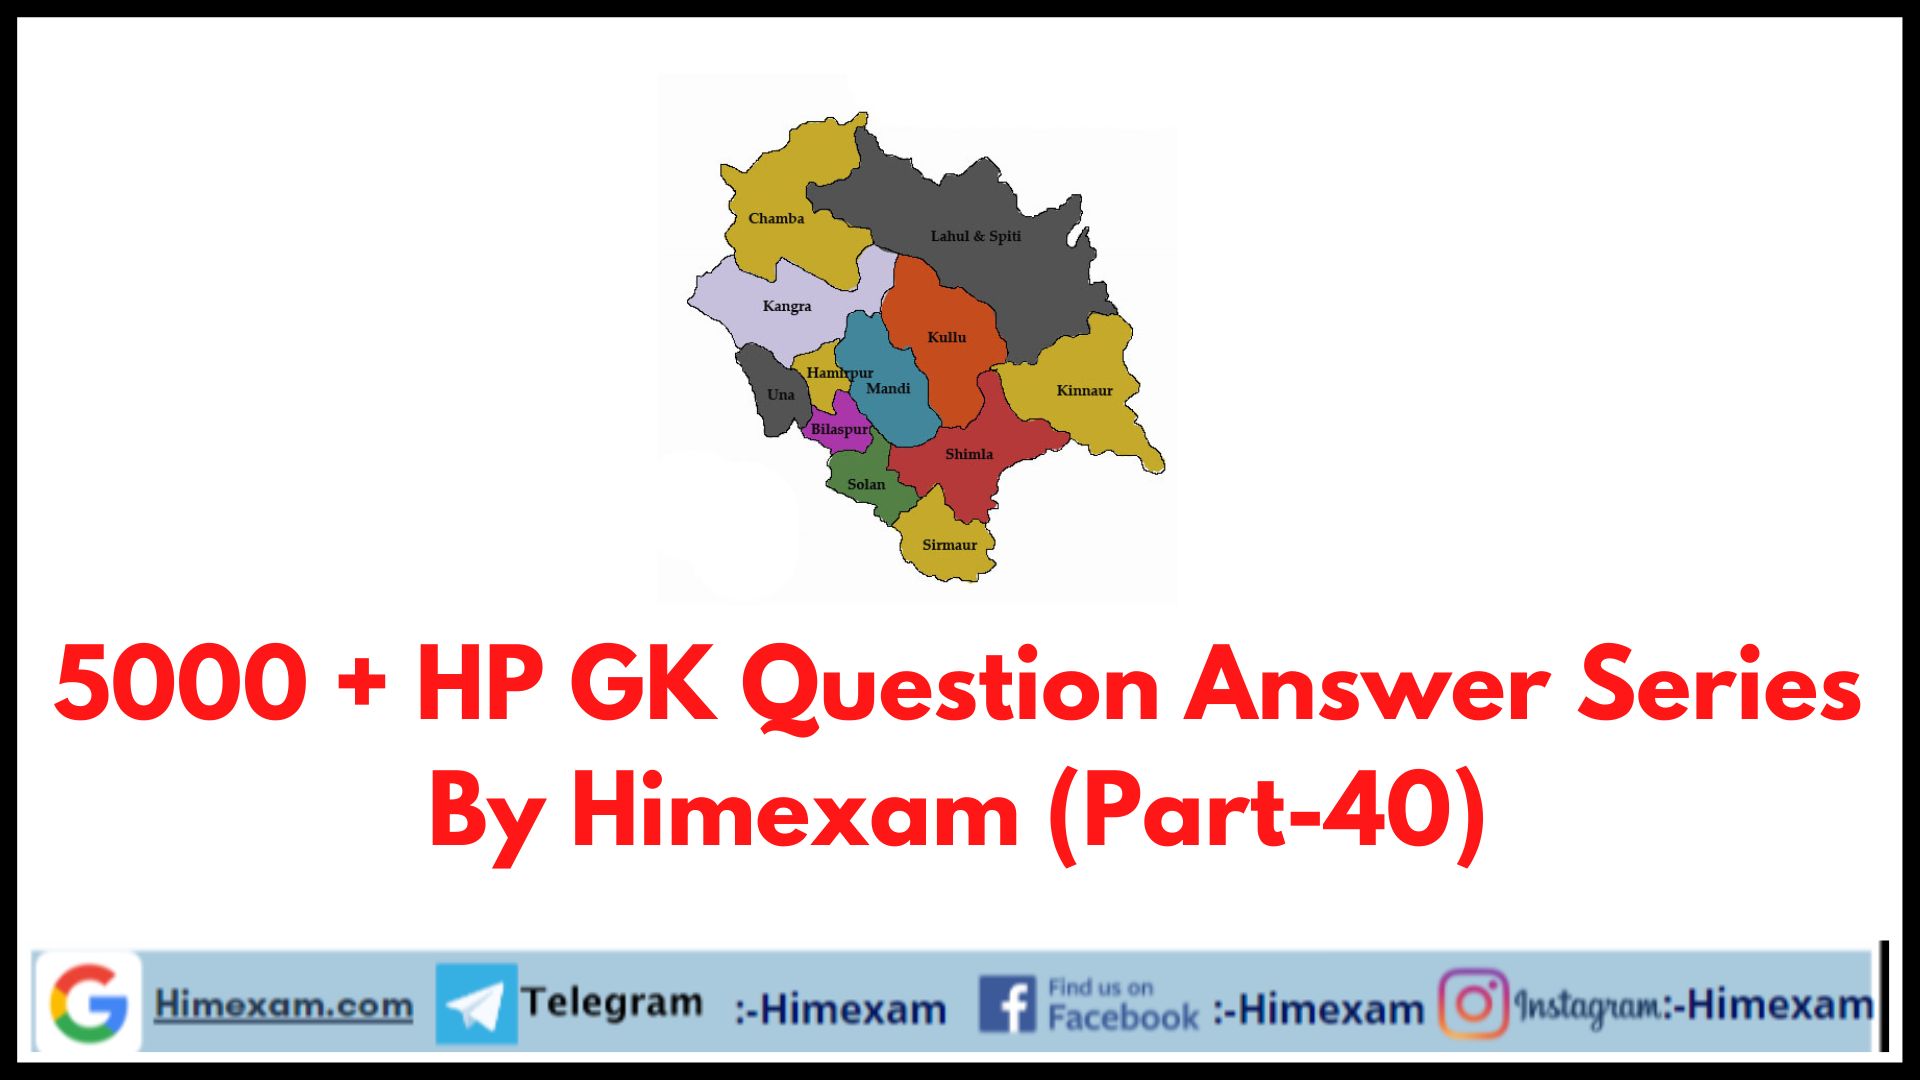 5000 + HP GK Question Answer Series By Himexam (Part-40)